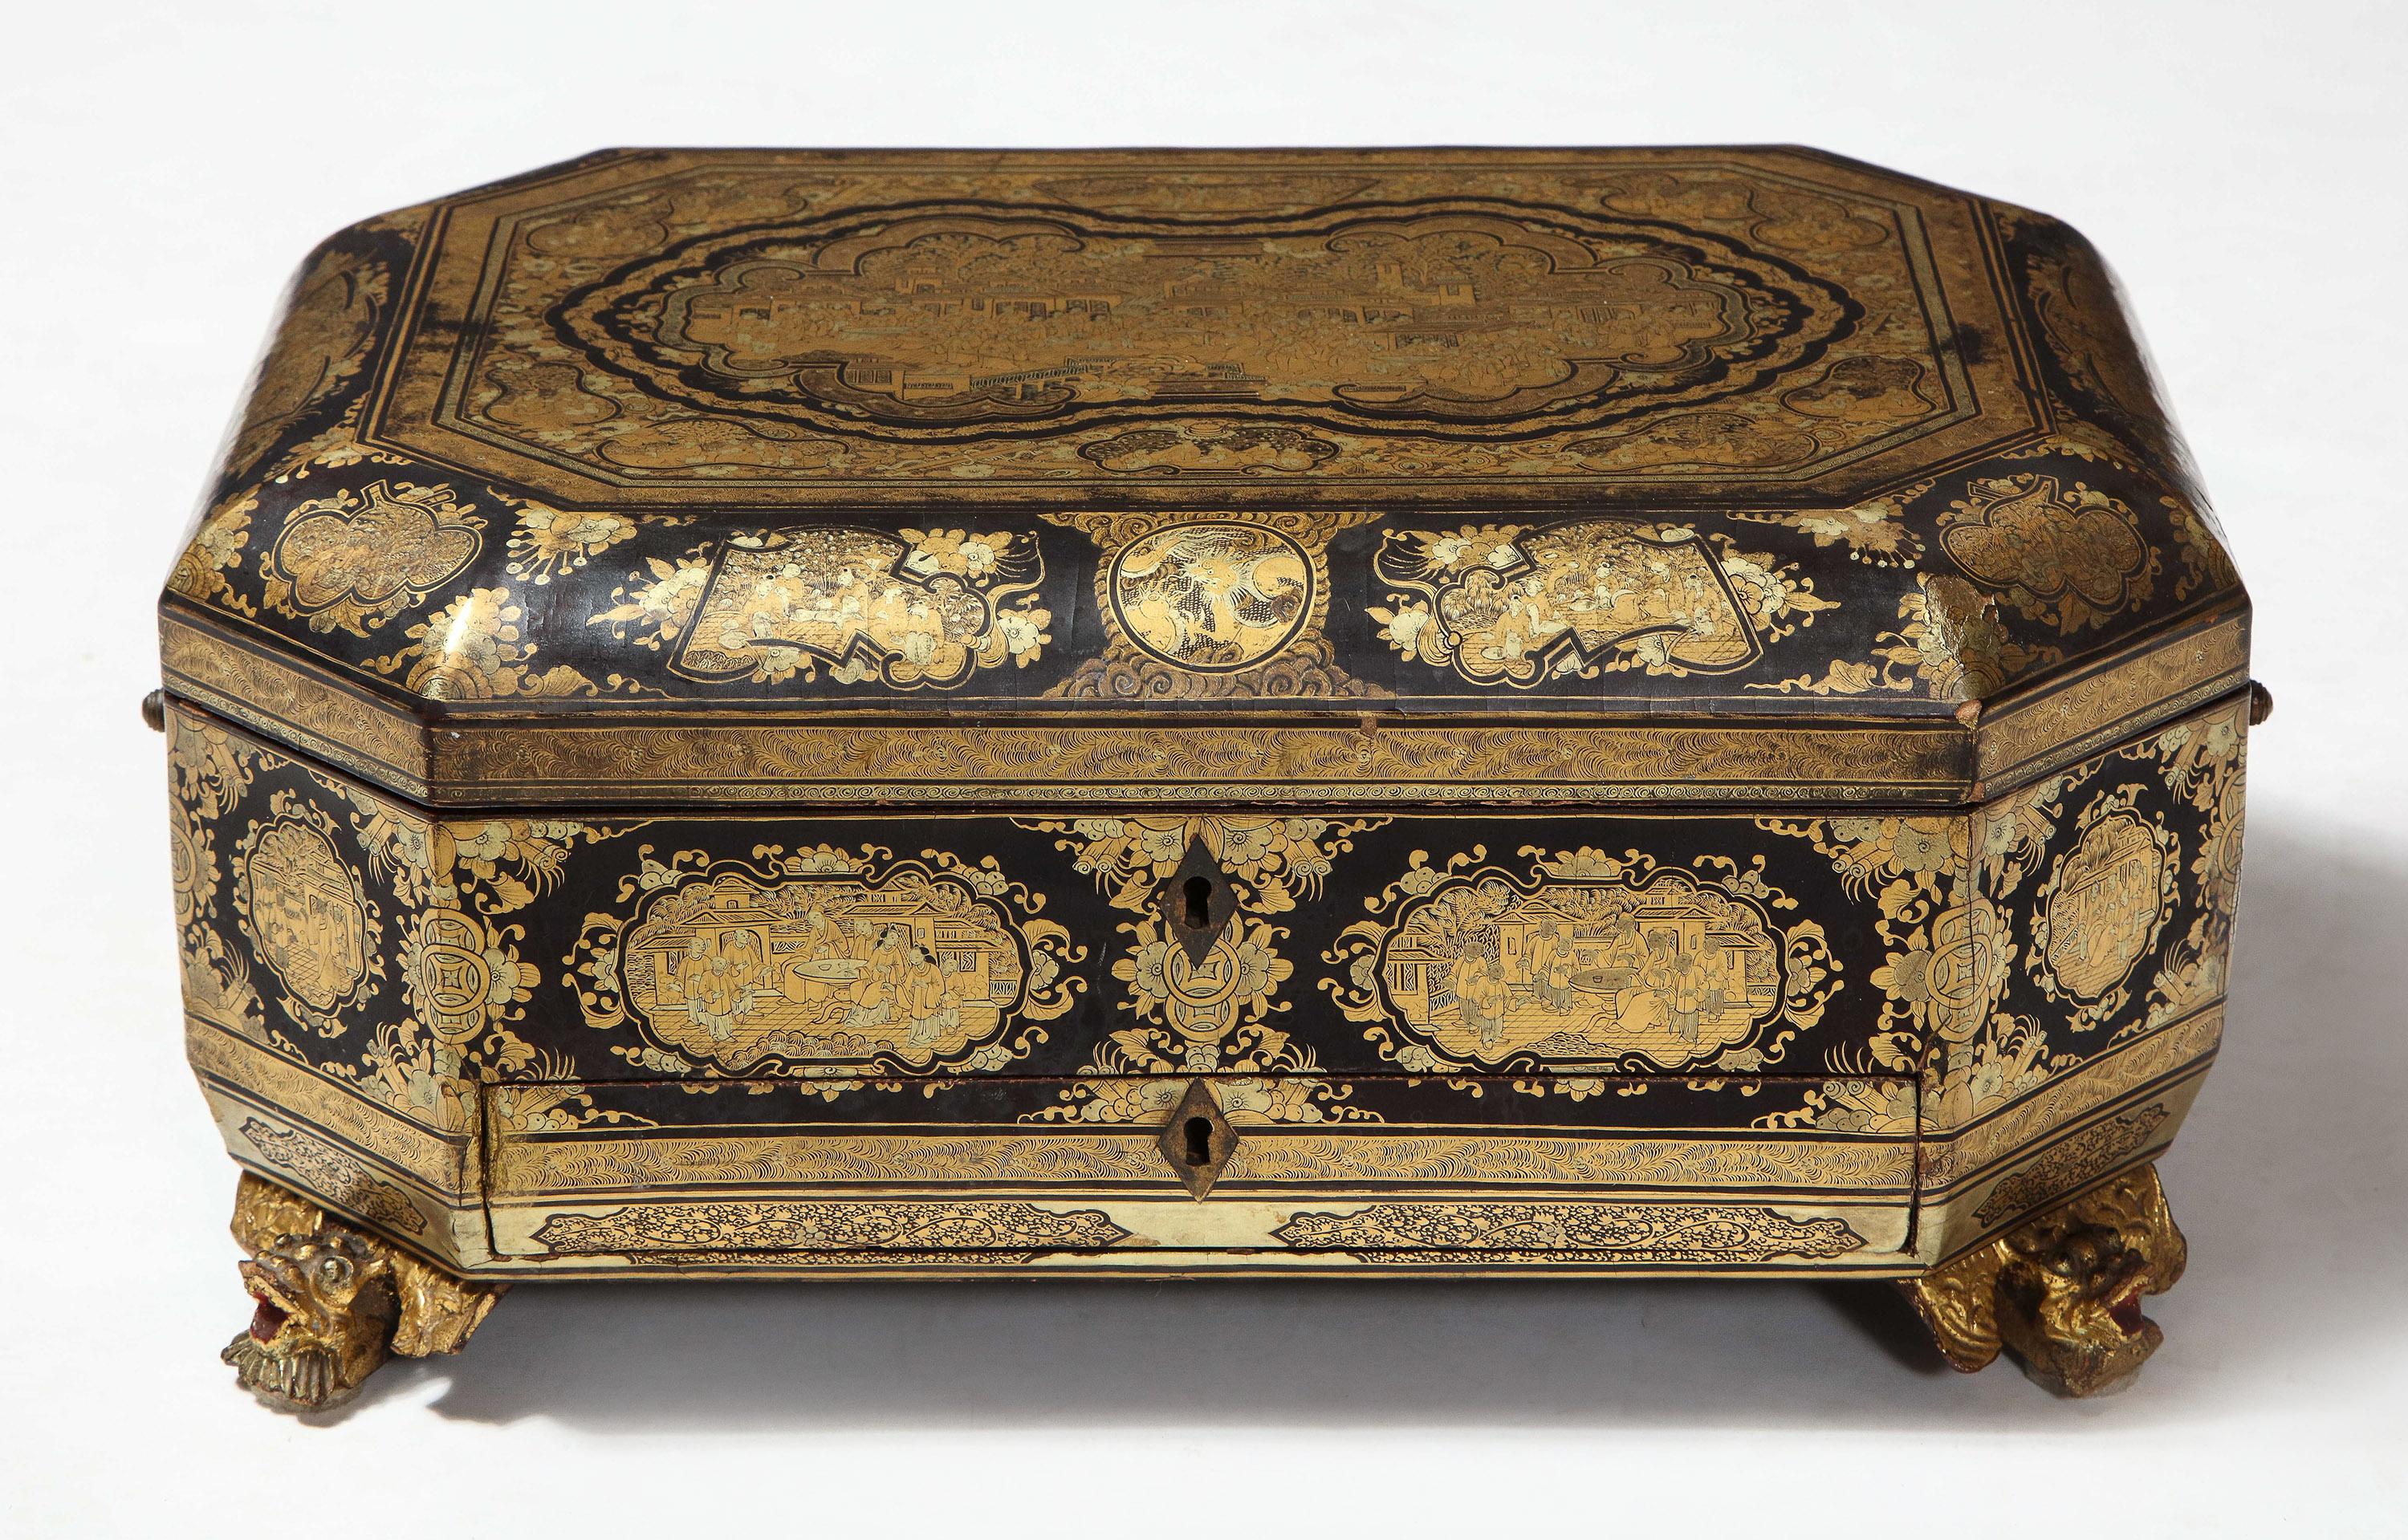 Chinese lacquer sewing box

19th century Chinese lacquer sewing box from the Qing dynasty. Having intricately designed lacquer and gilding throughout, with lower pullout work surface and dragon feet. 
Superb condition.